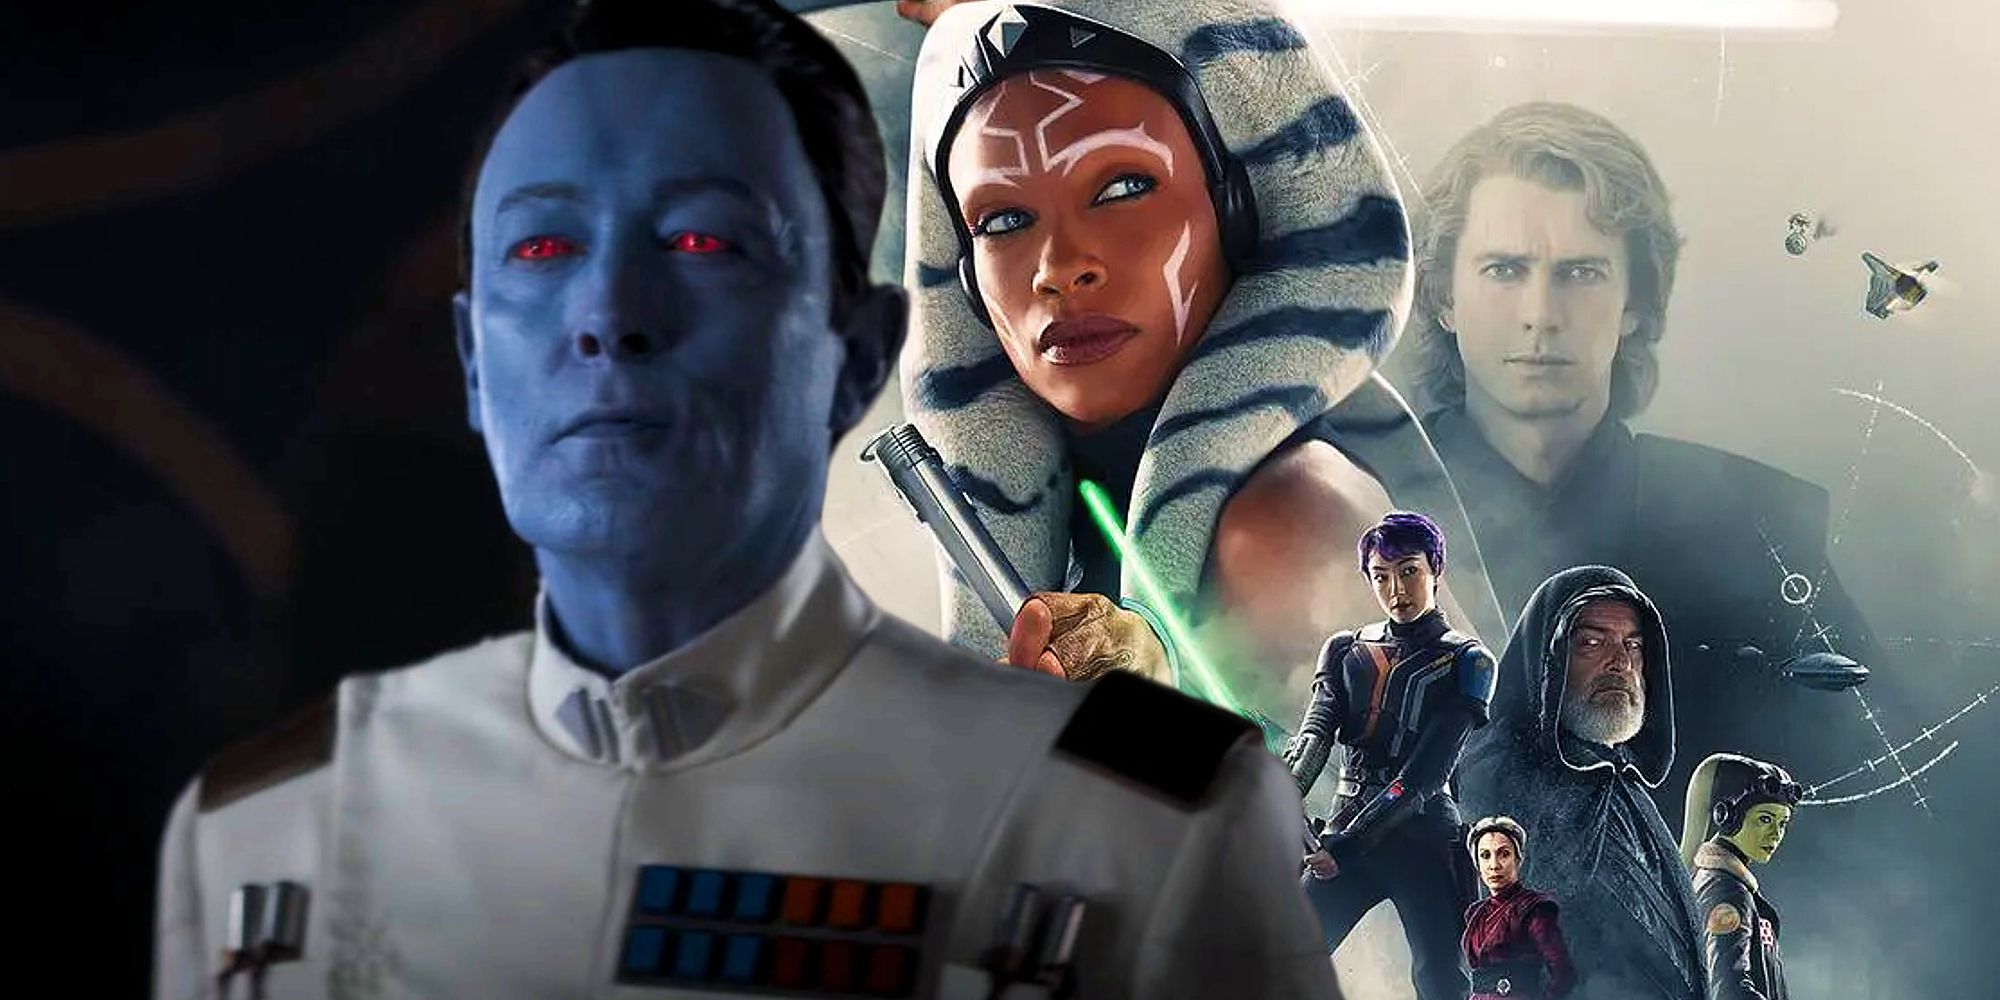 Ahsoka's official poster and Grand Admiral Thrawn